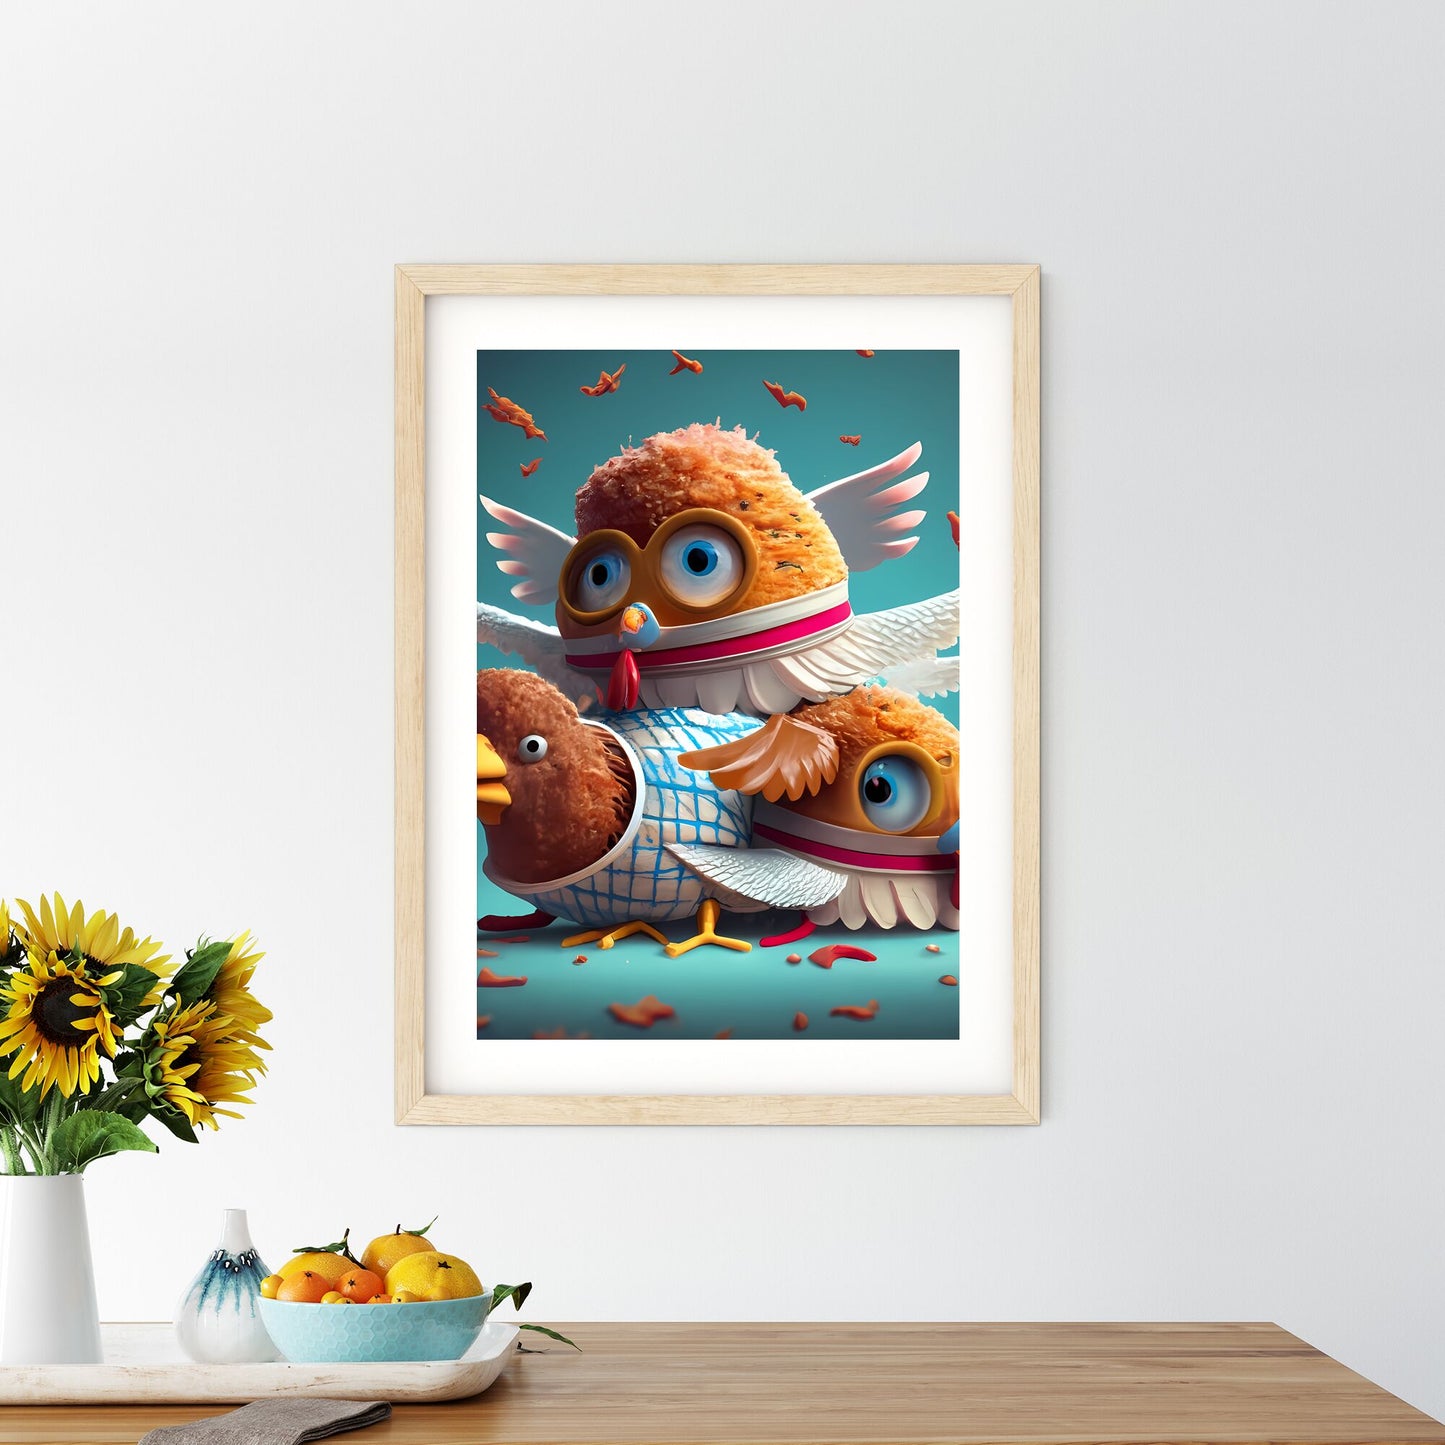 A Group Of Birds With Wings Art Print Default Title